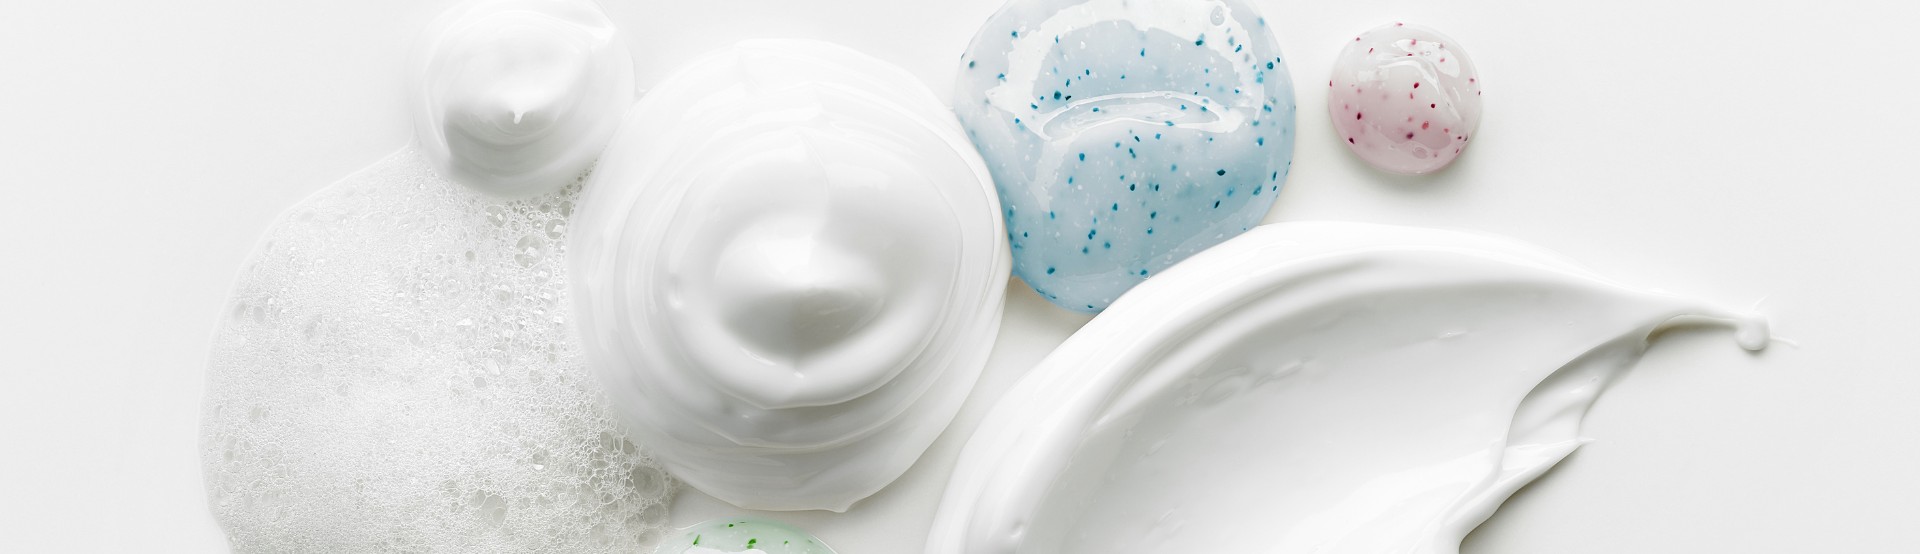 Regulatory services for new cosmetic ingredients